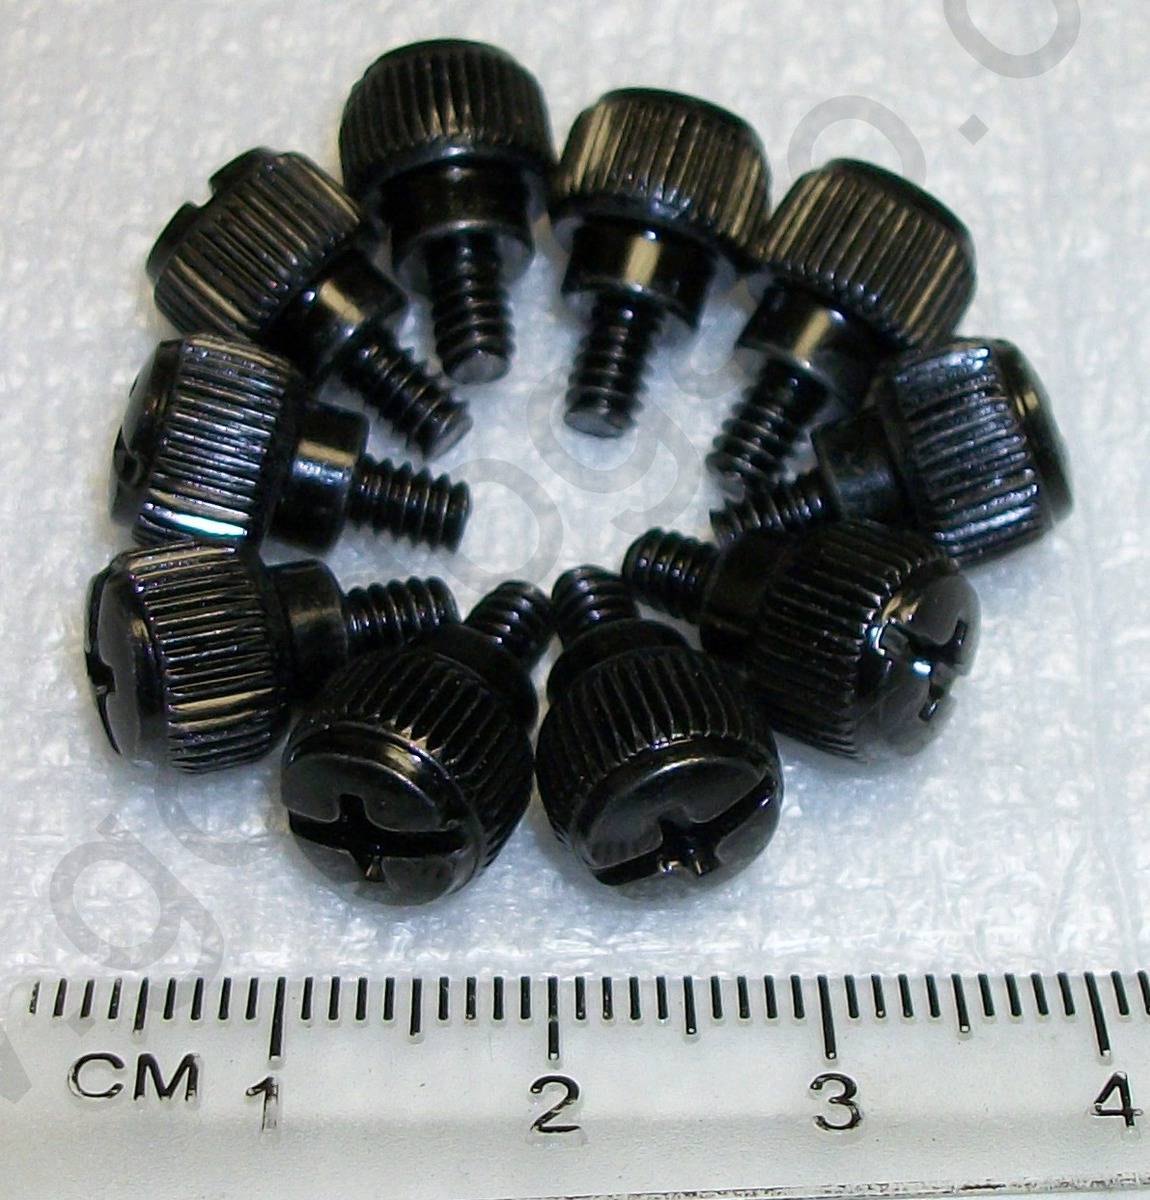 Lot of 10 #6-32 x 6mm Black Thumb Screws for PC Computer Case